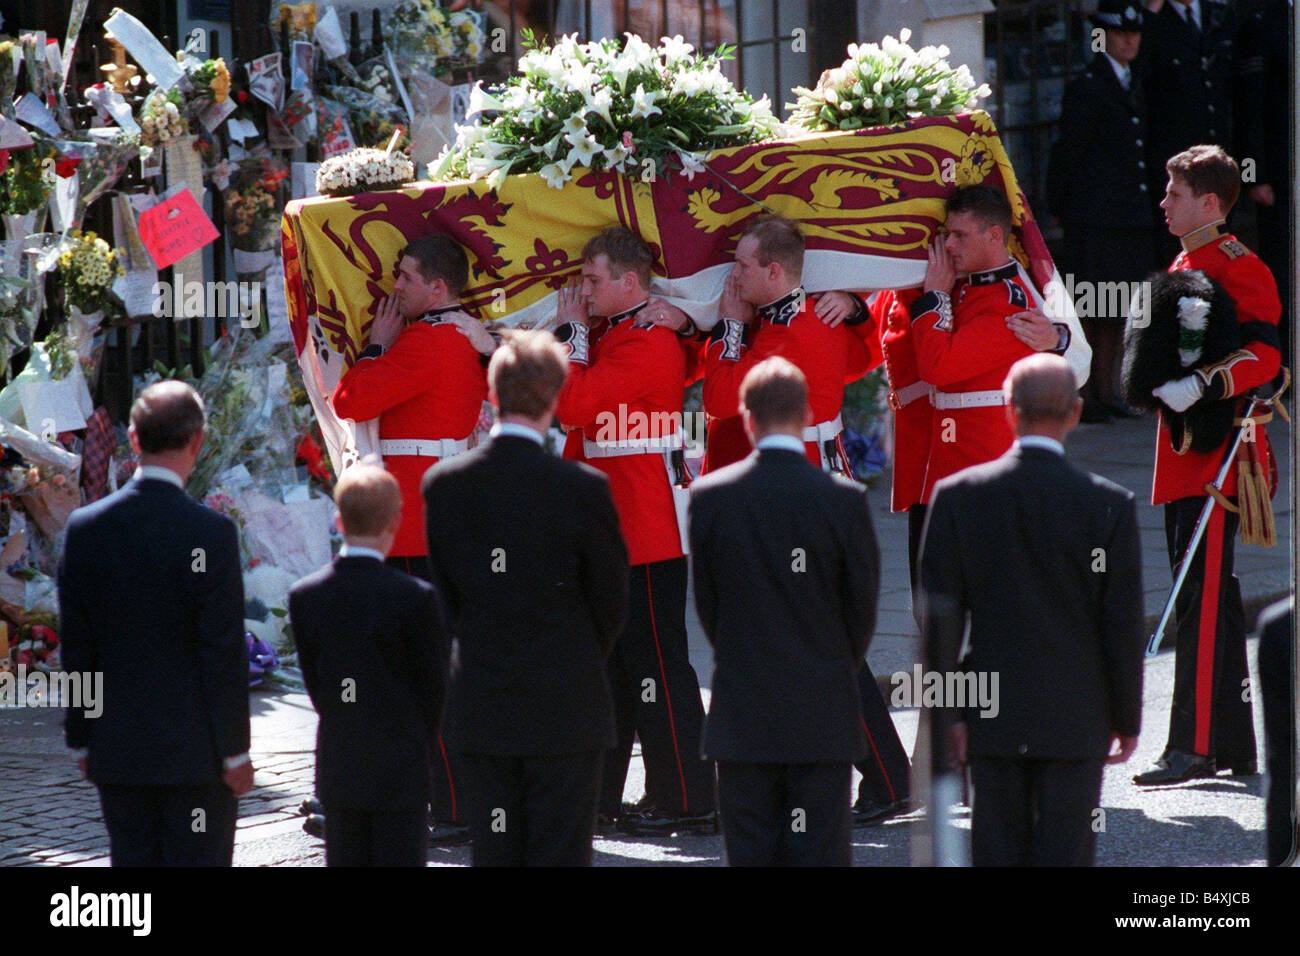 Princess Diana Funeral 6th September 1997 L TO R Prince Charles Prince Harry Lord Charles Althorp Prince William Prince Philip Duke of Edinburgh watch Diana s coffin go by carried by soldiers Stock Photo